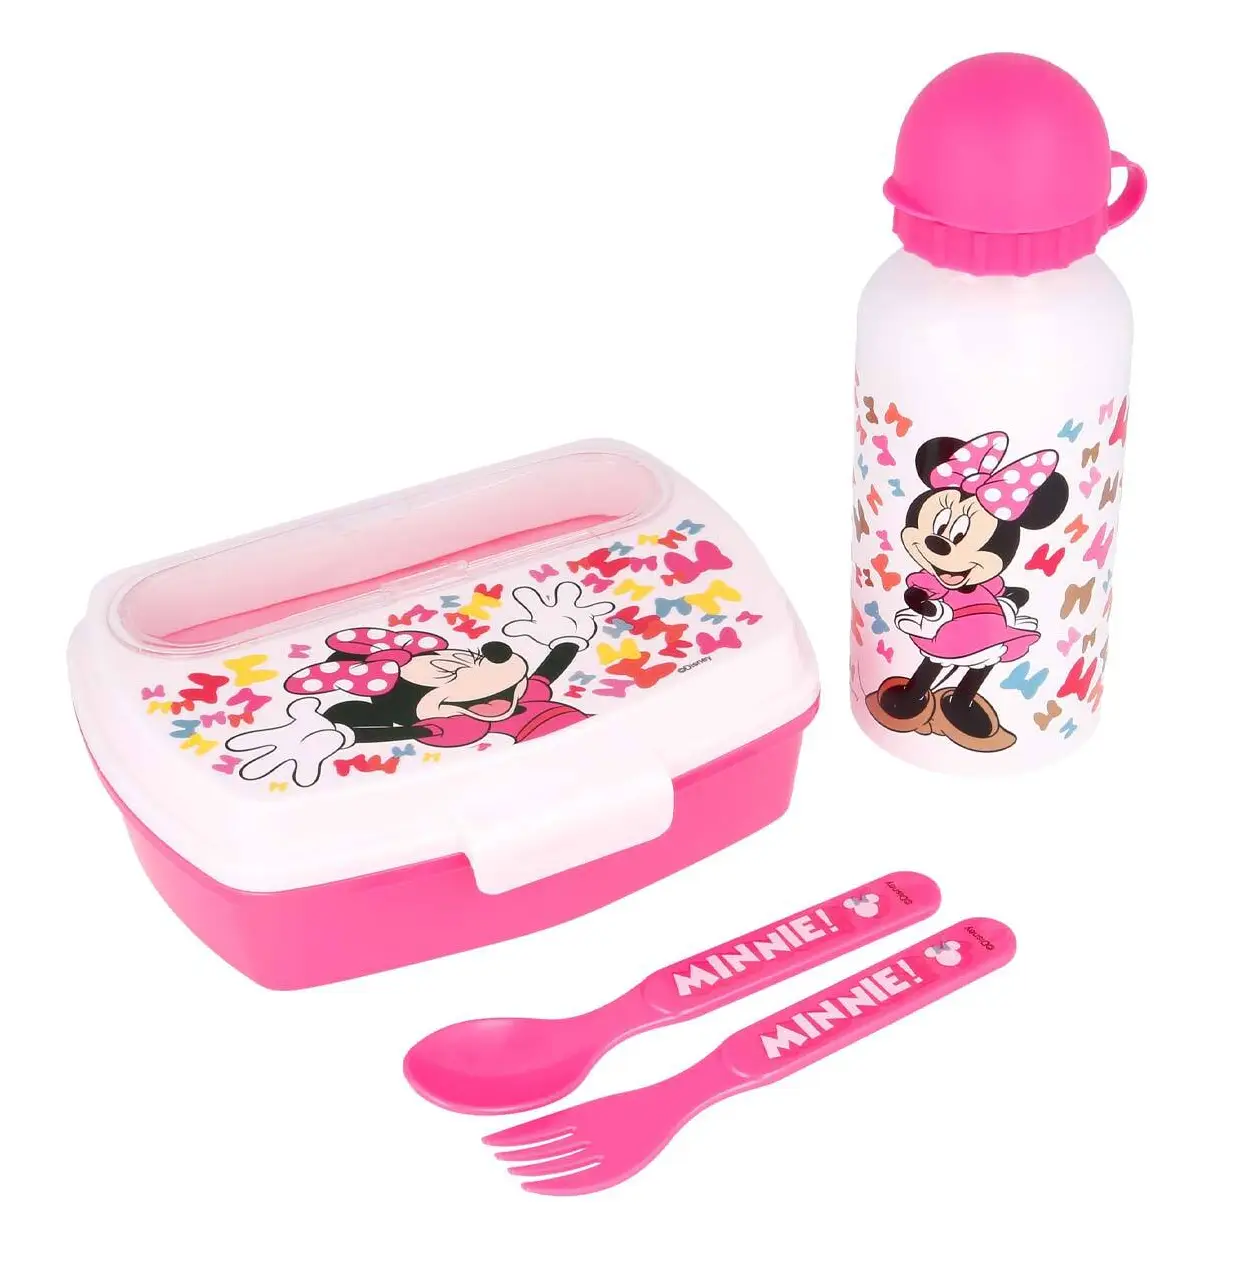 Set Bows 4er So Lunchset Minnie Edgy